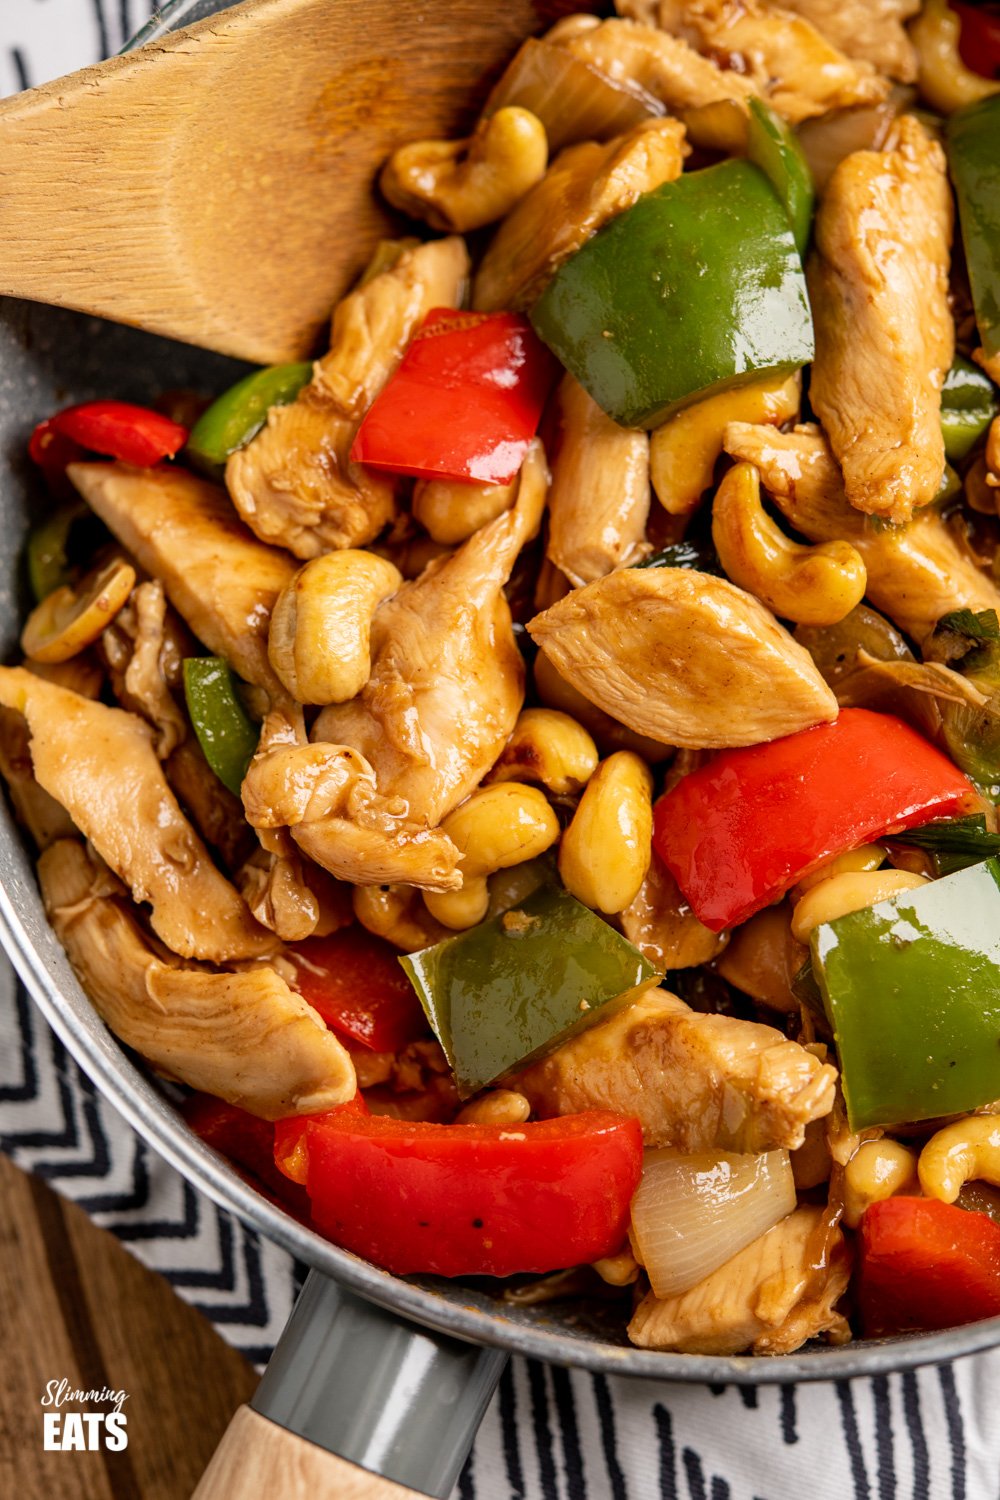 Chinese cashew chicken in a grey frying pan with wooden spoon